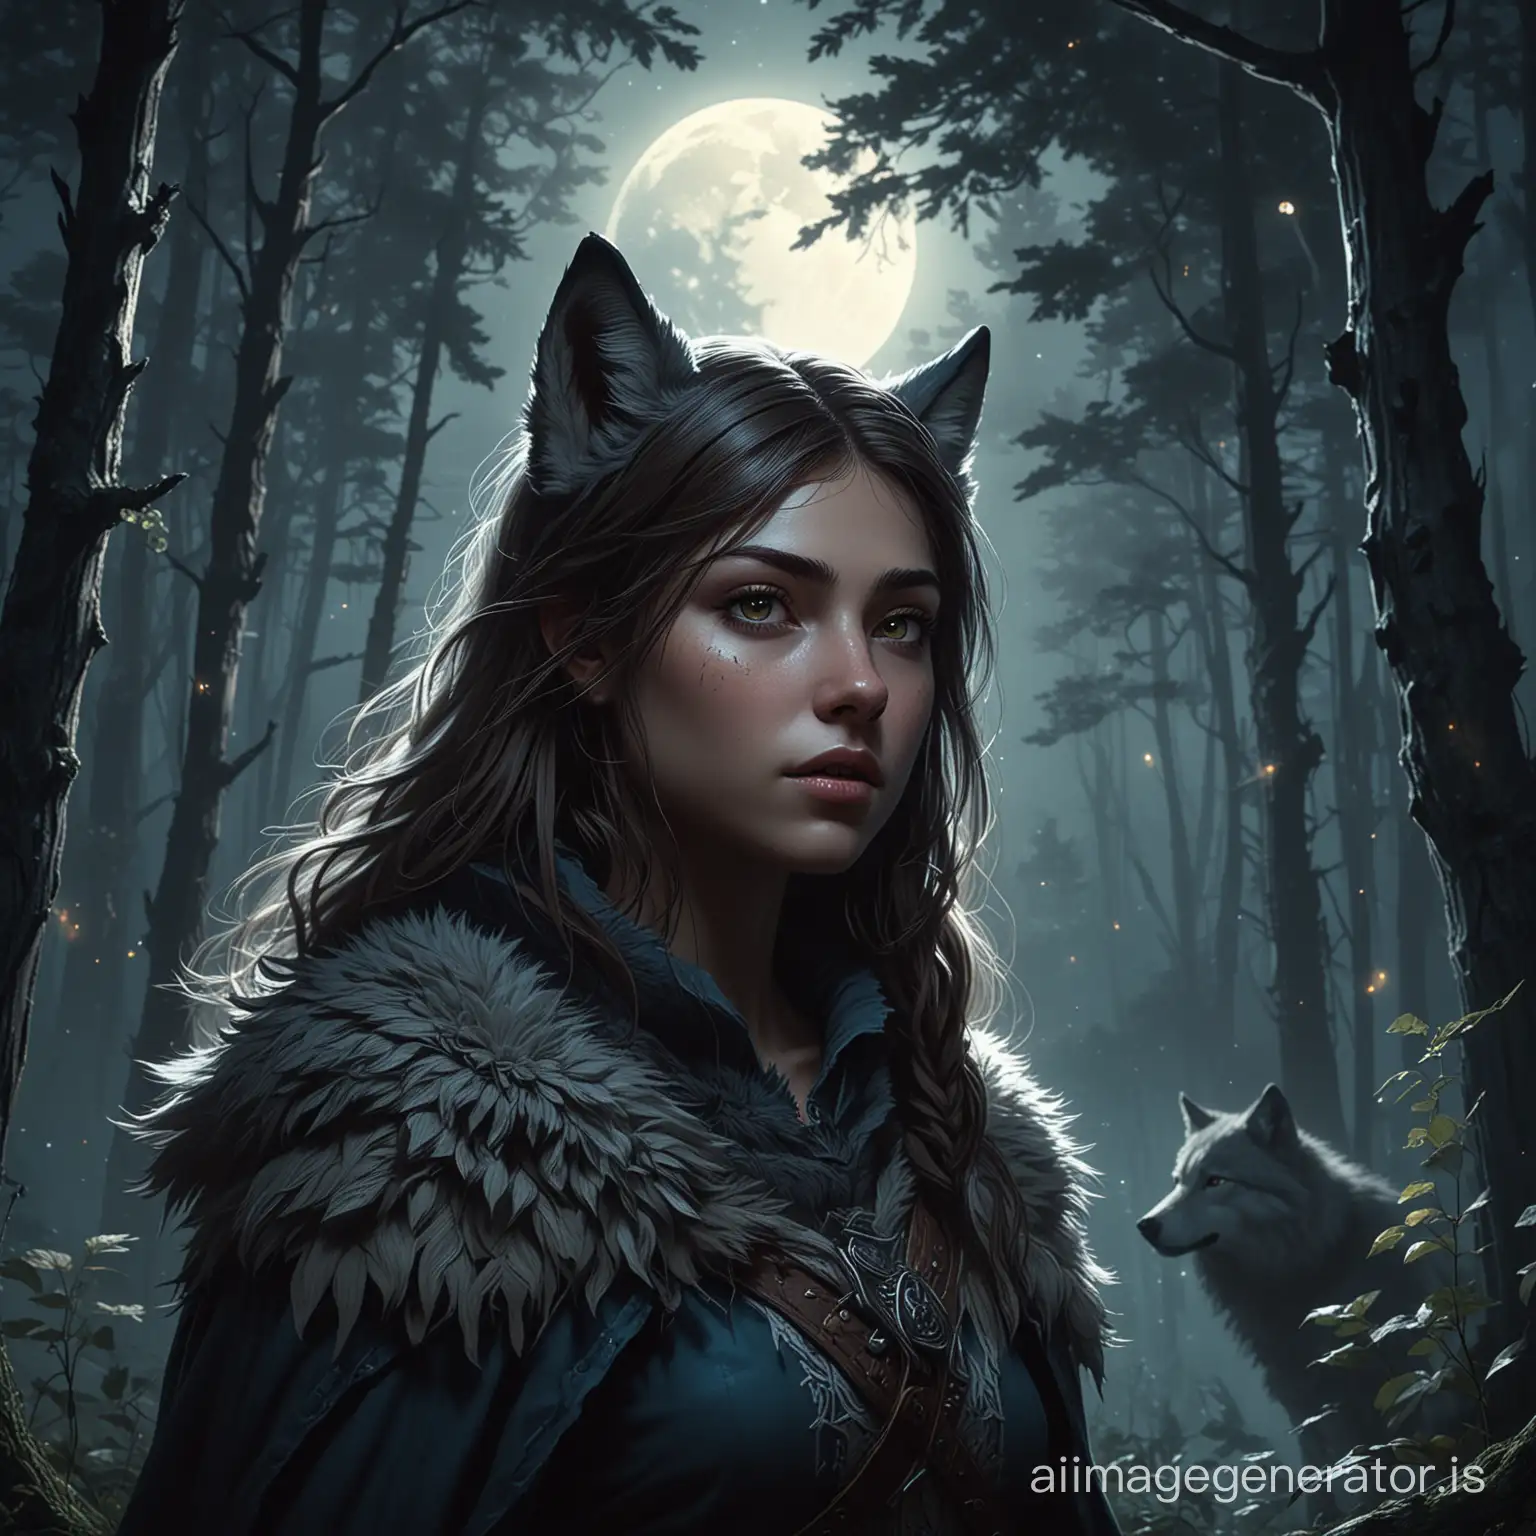 Mystical-Moonlit-Night-Girl-and-Wolf-Inspired-by-Skyrim-in-Fantasy-Art-Style